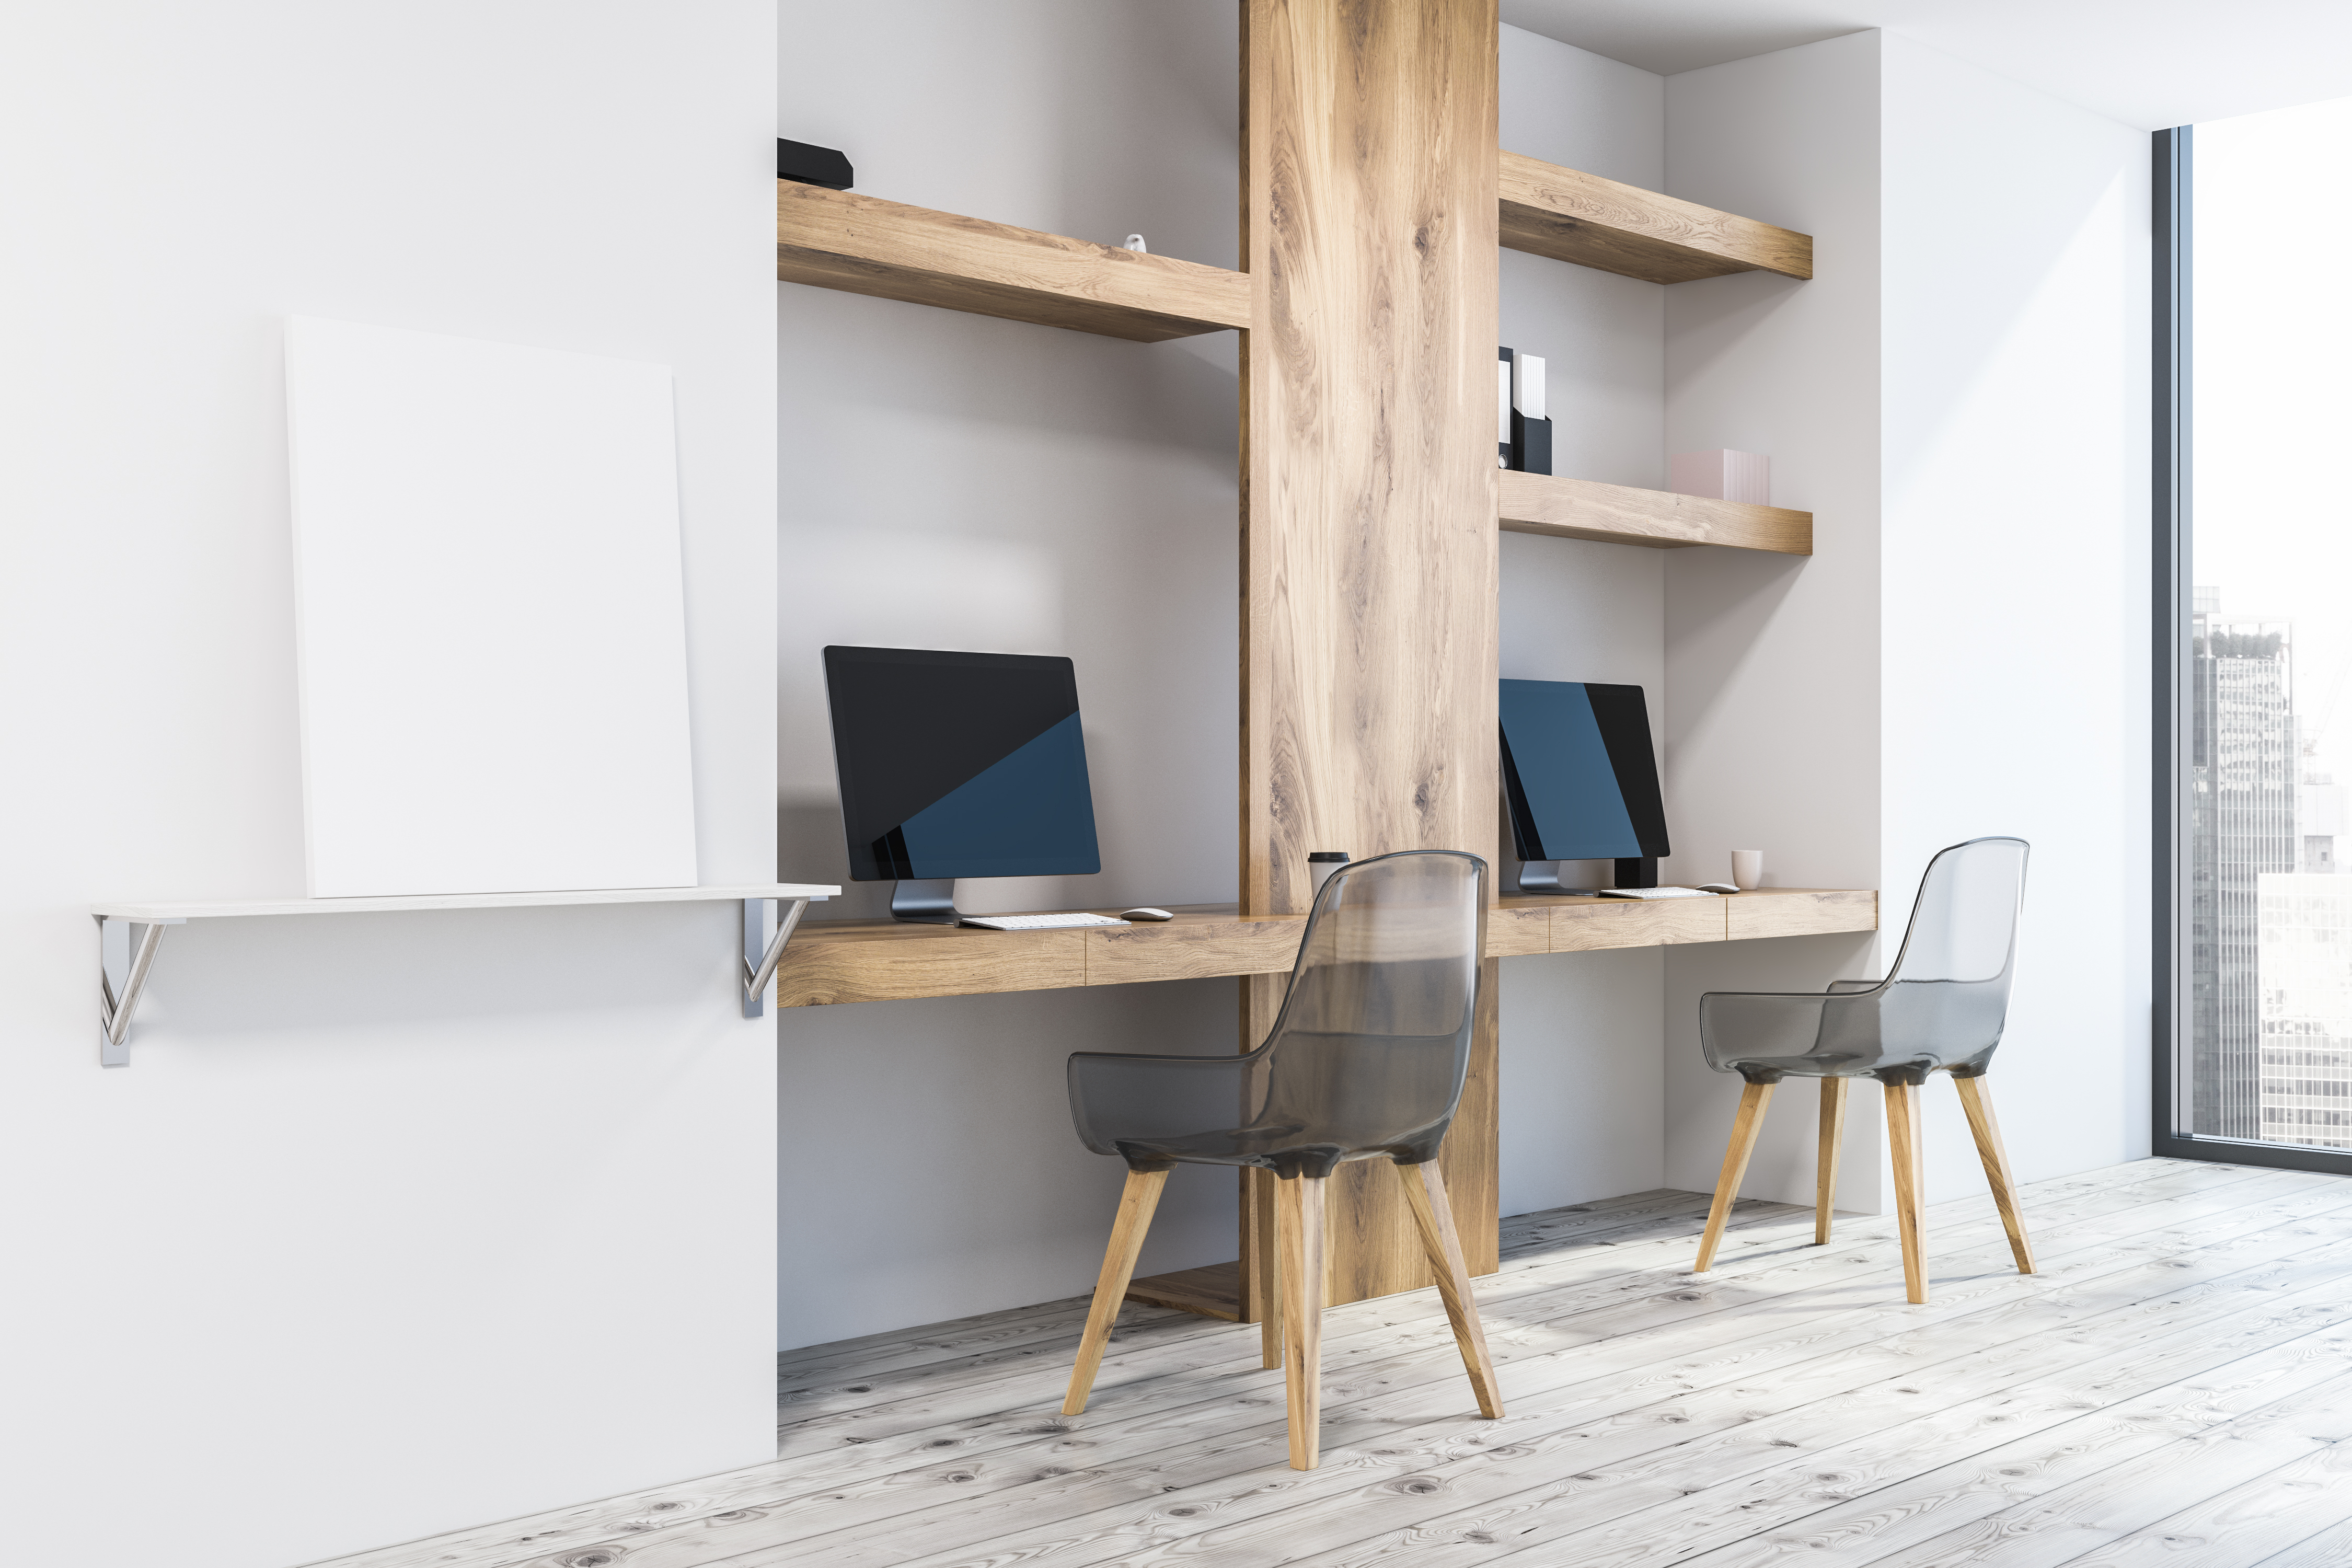 How to Build a Safe & Productive Home Office